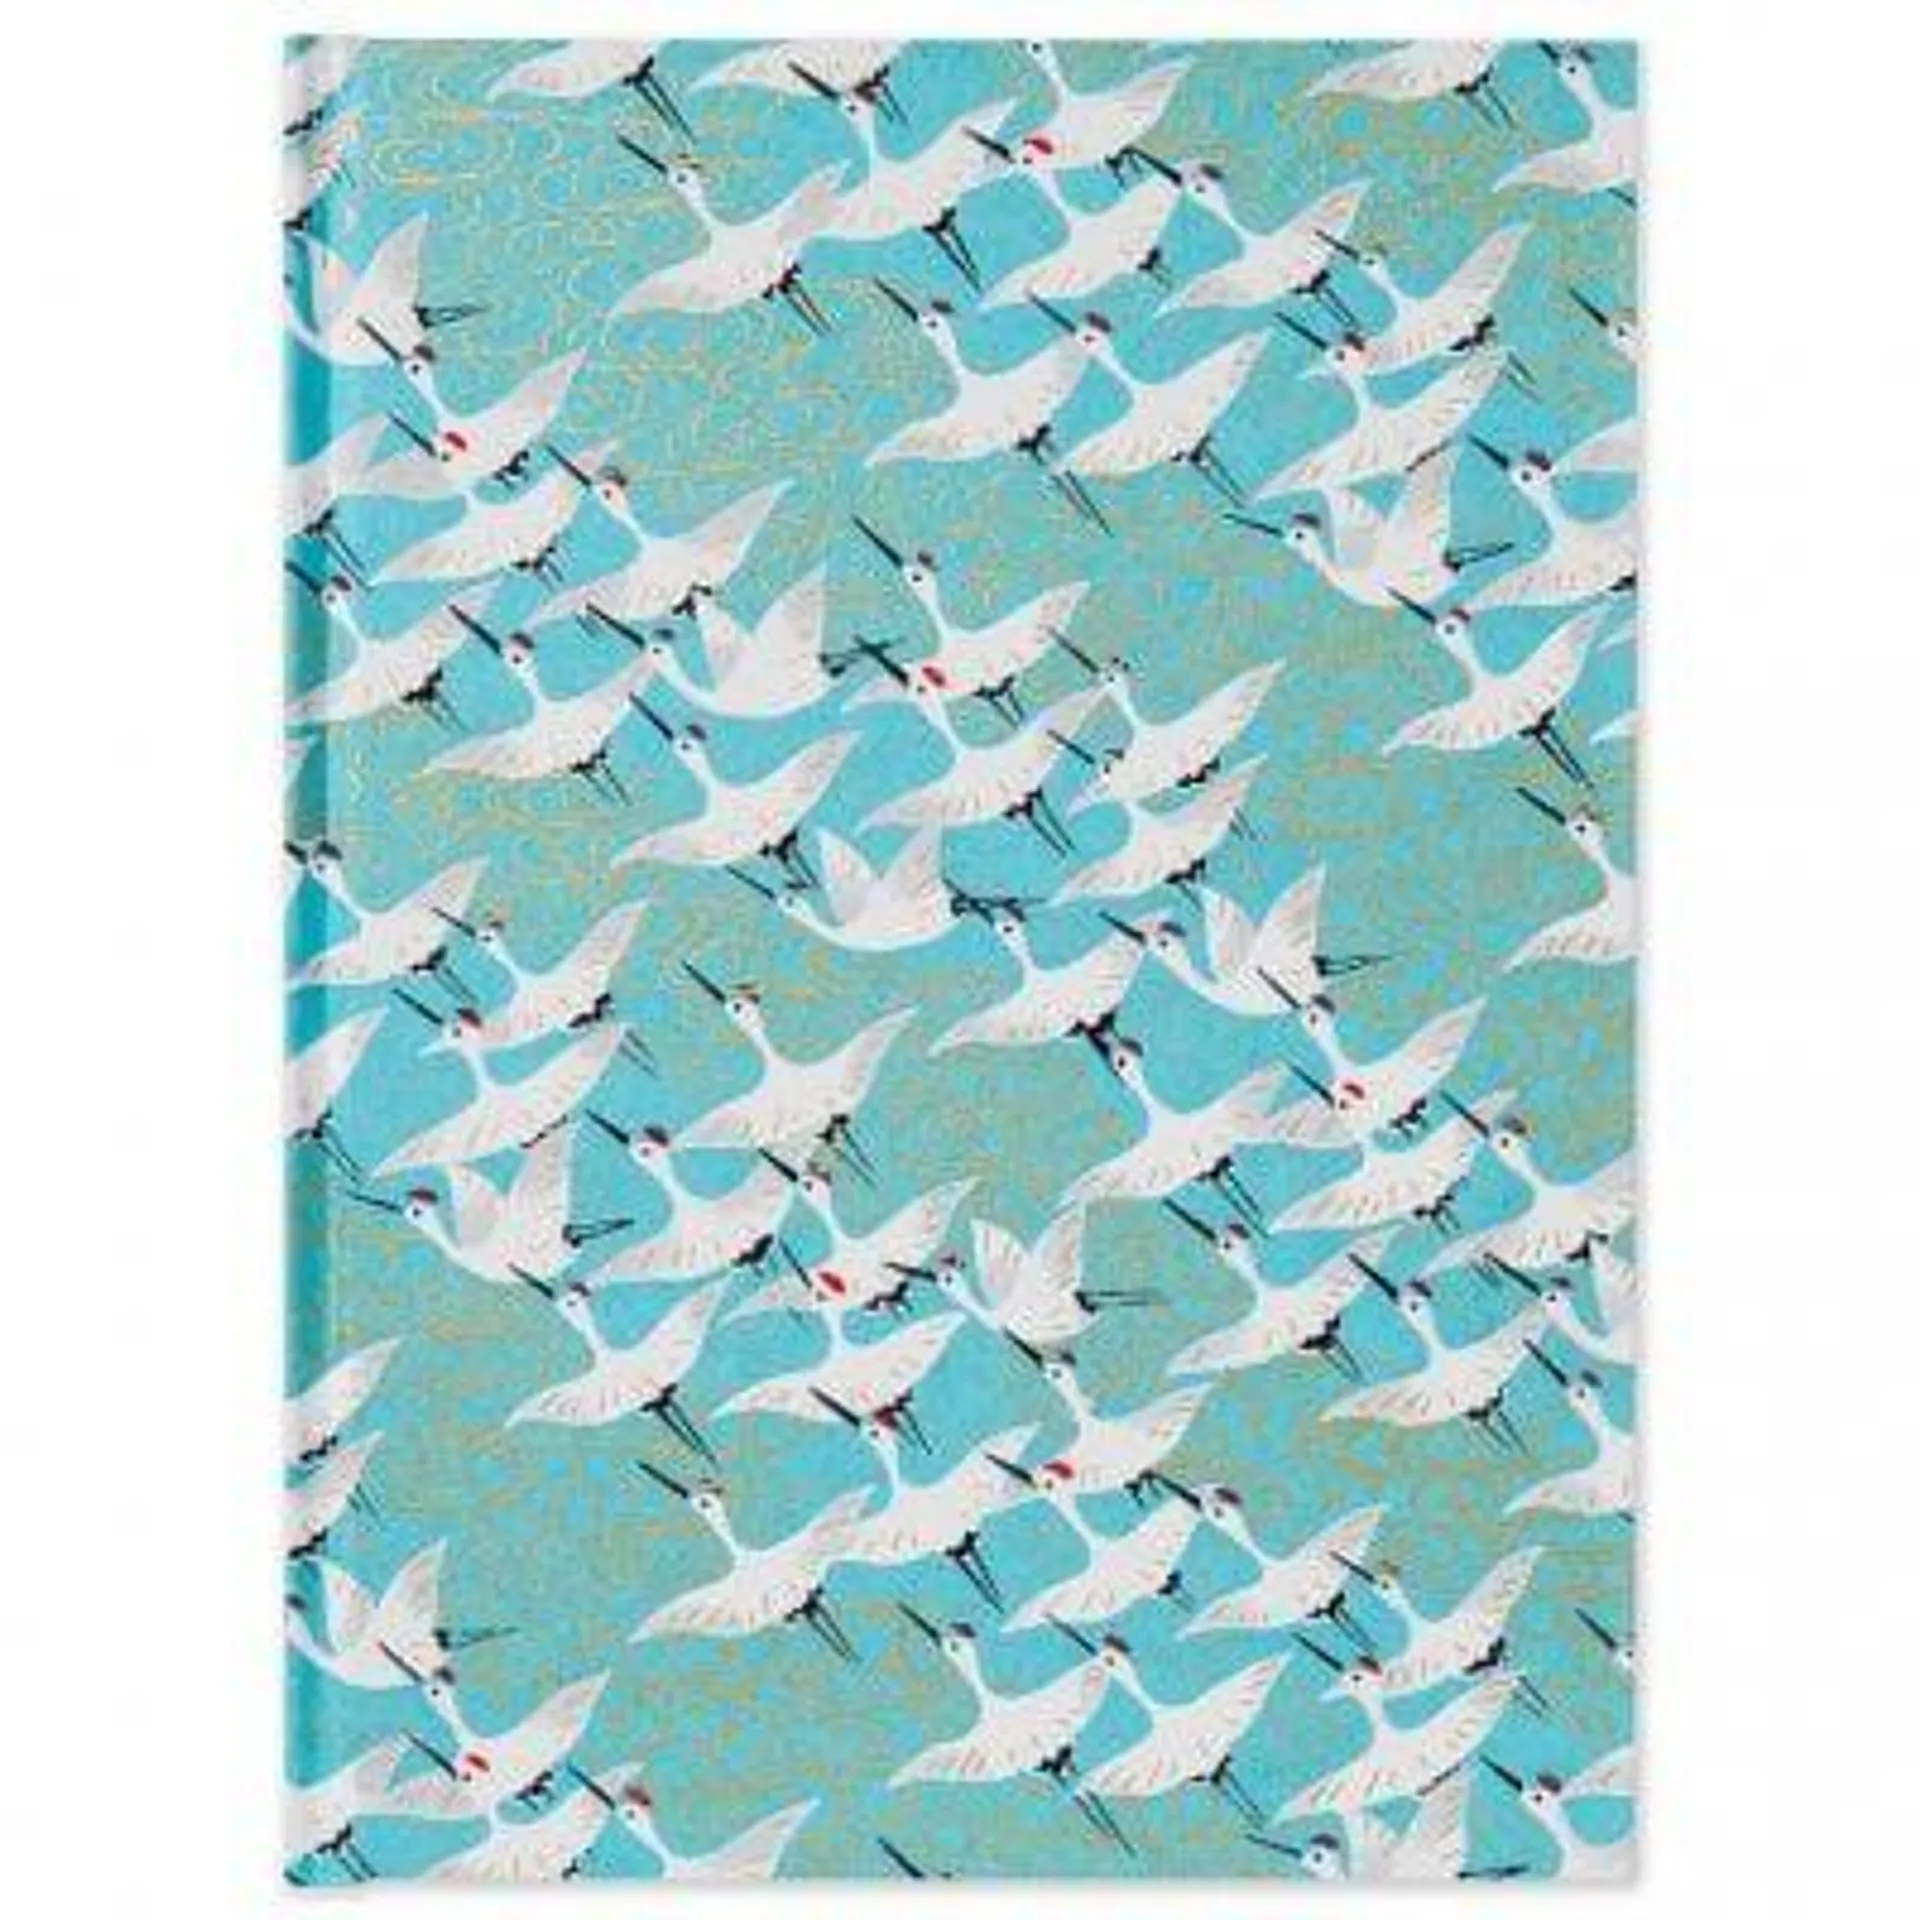 Notebook Lined Cranes On Blue